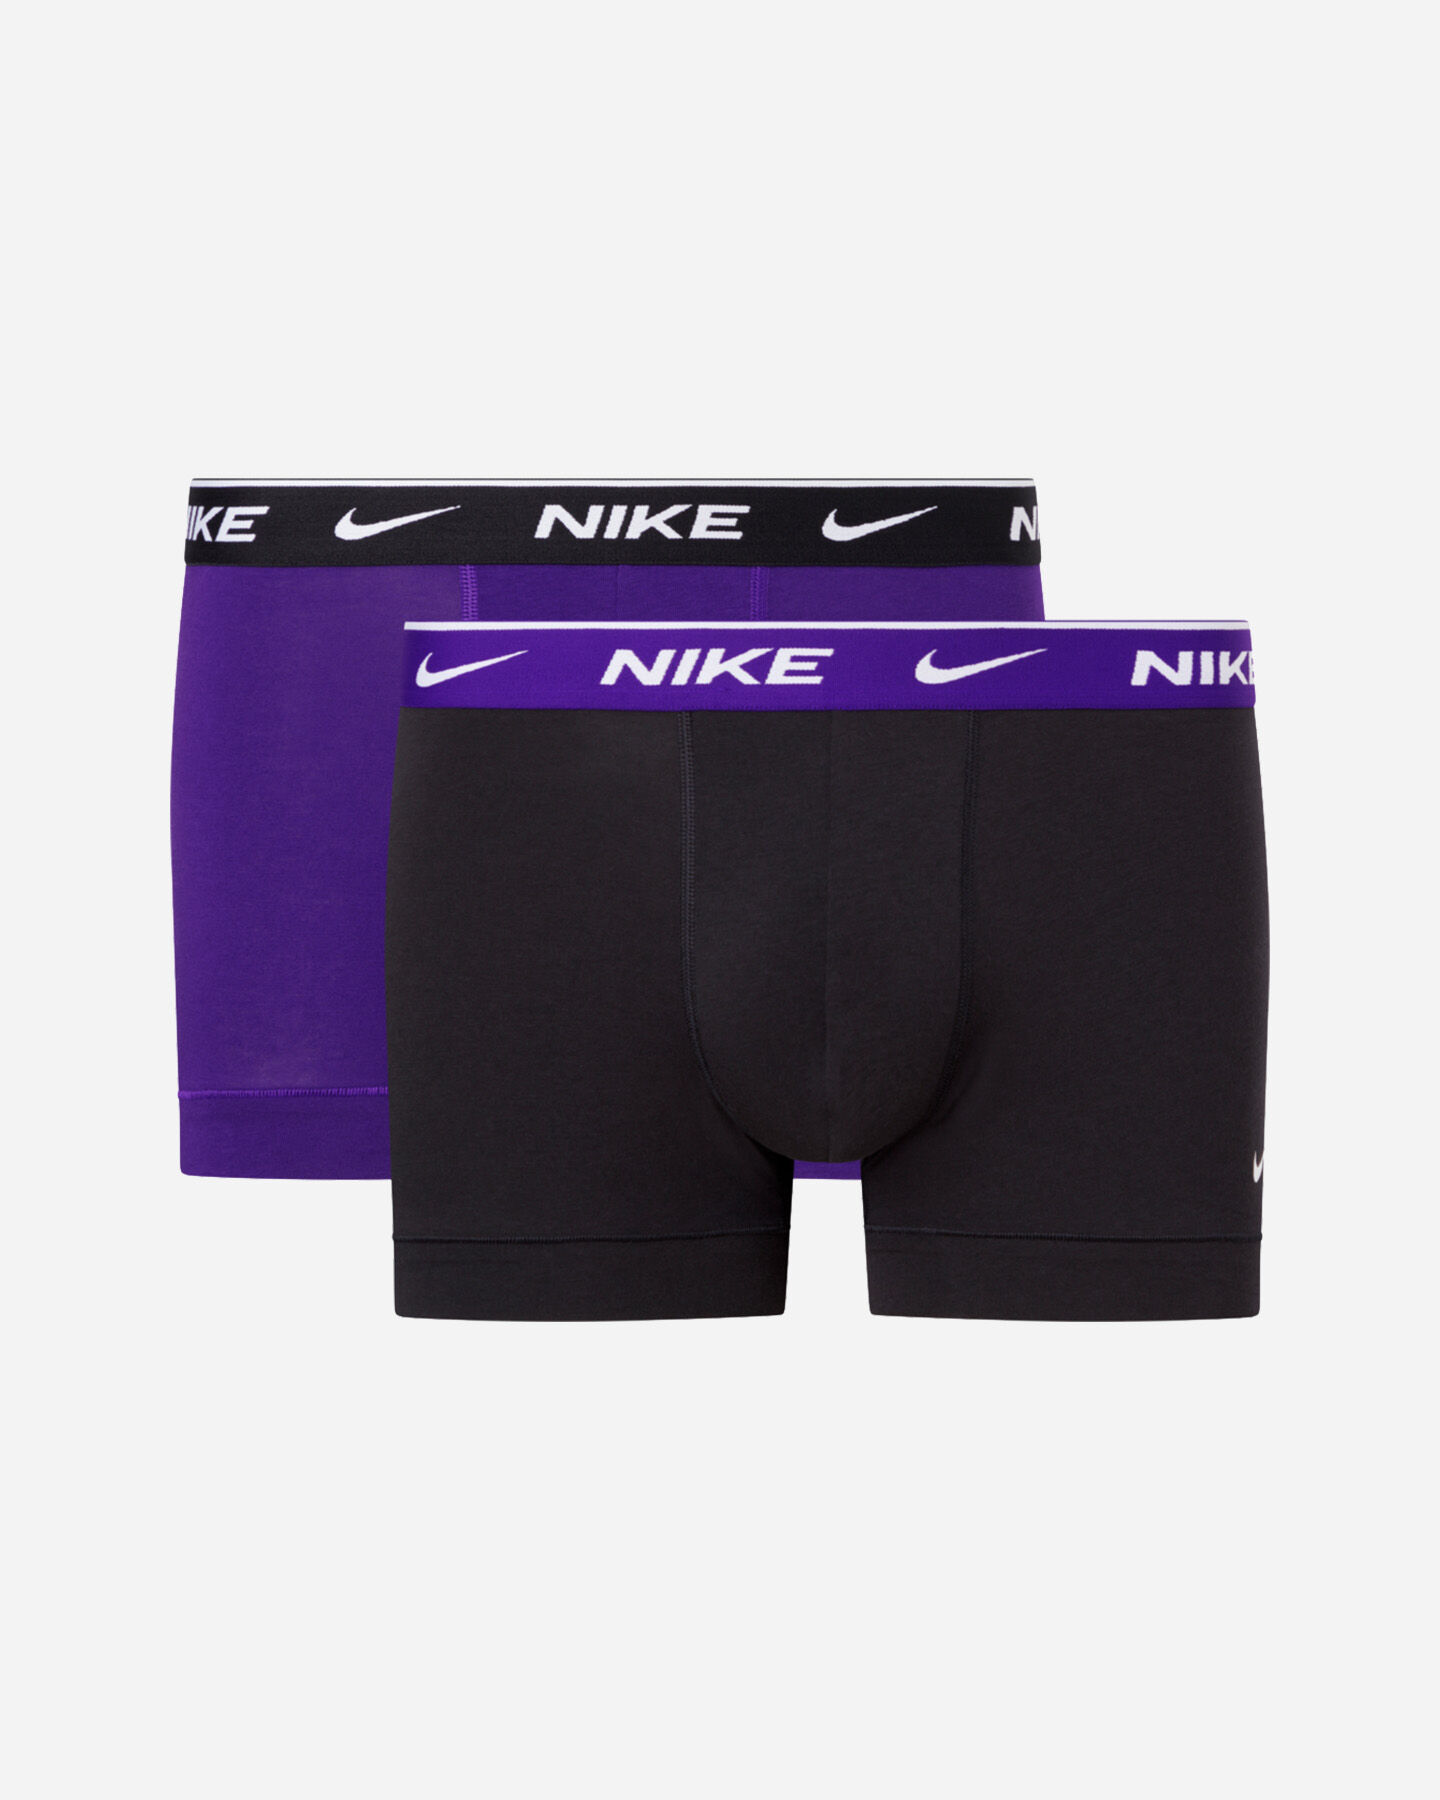  Intimo NIKE 2 PACK BOXER EVERYDAY COTTON STRETCH M S4110504|1ME|S scatto 0